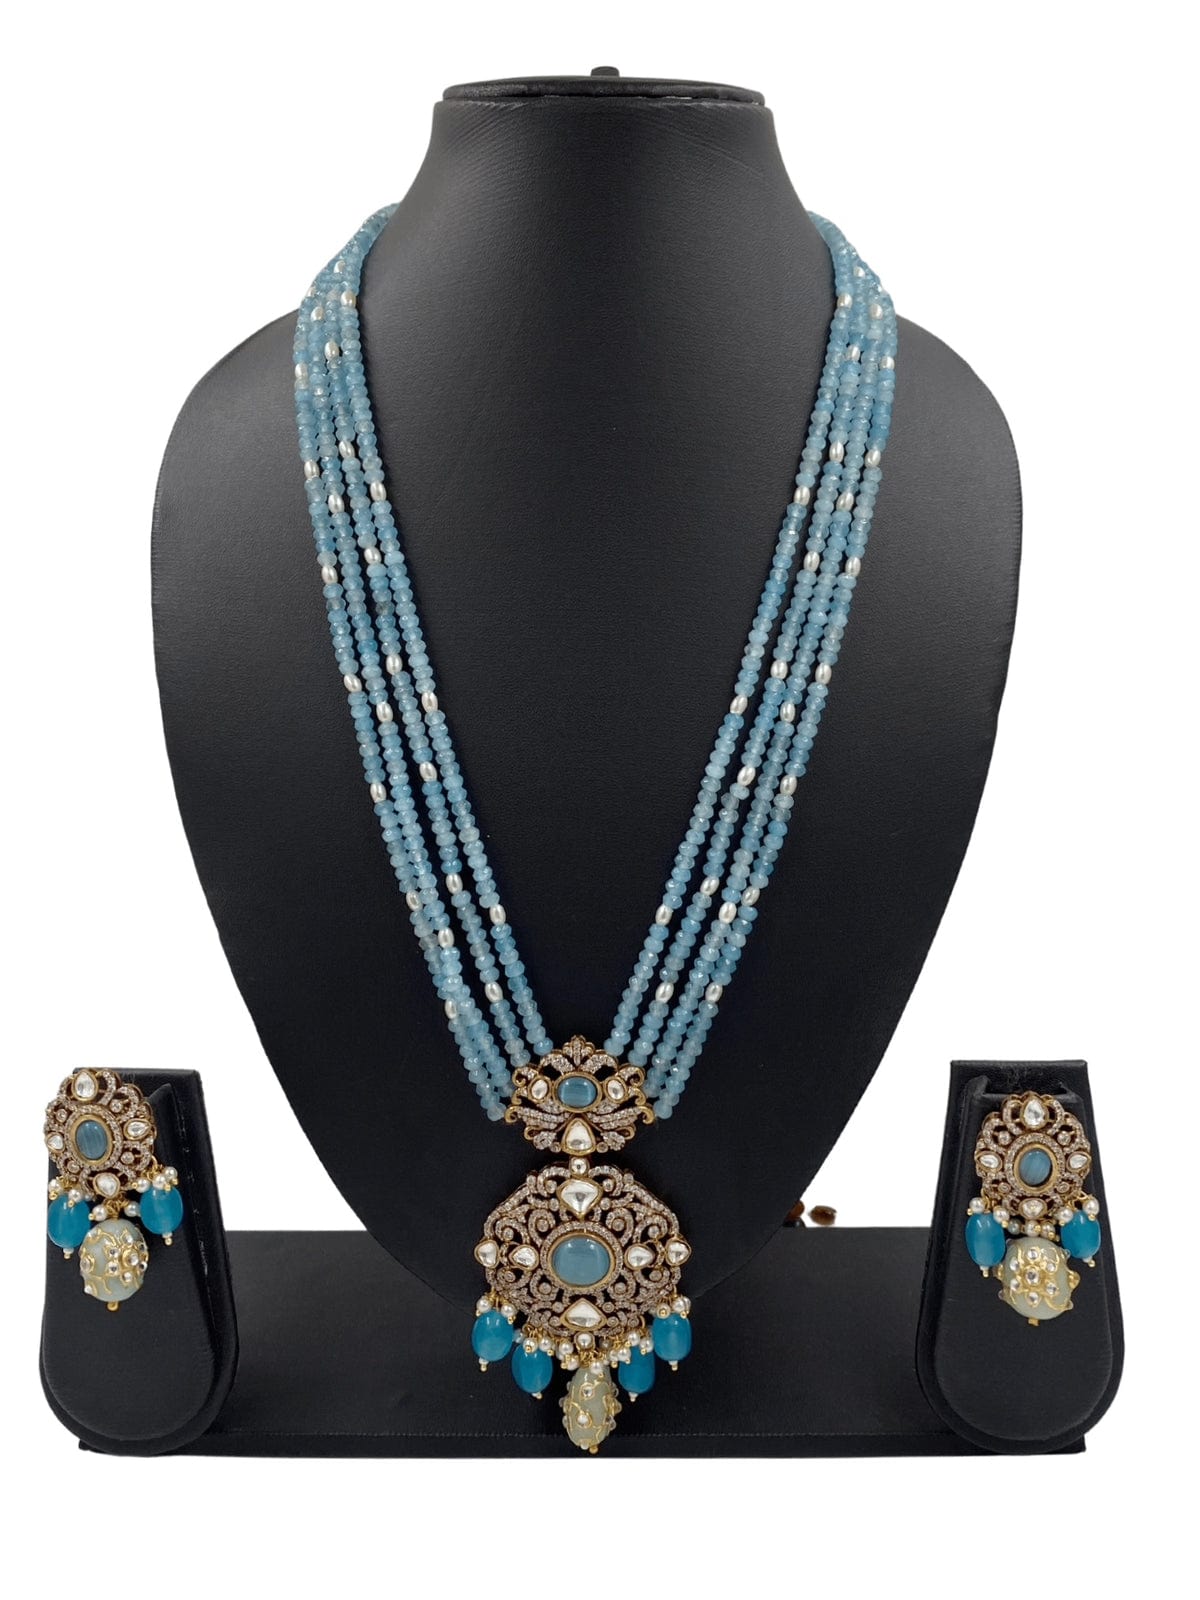 Traditional Antique Polki And AD Pendant Necklace For Women Victorian Necklace Sets